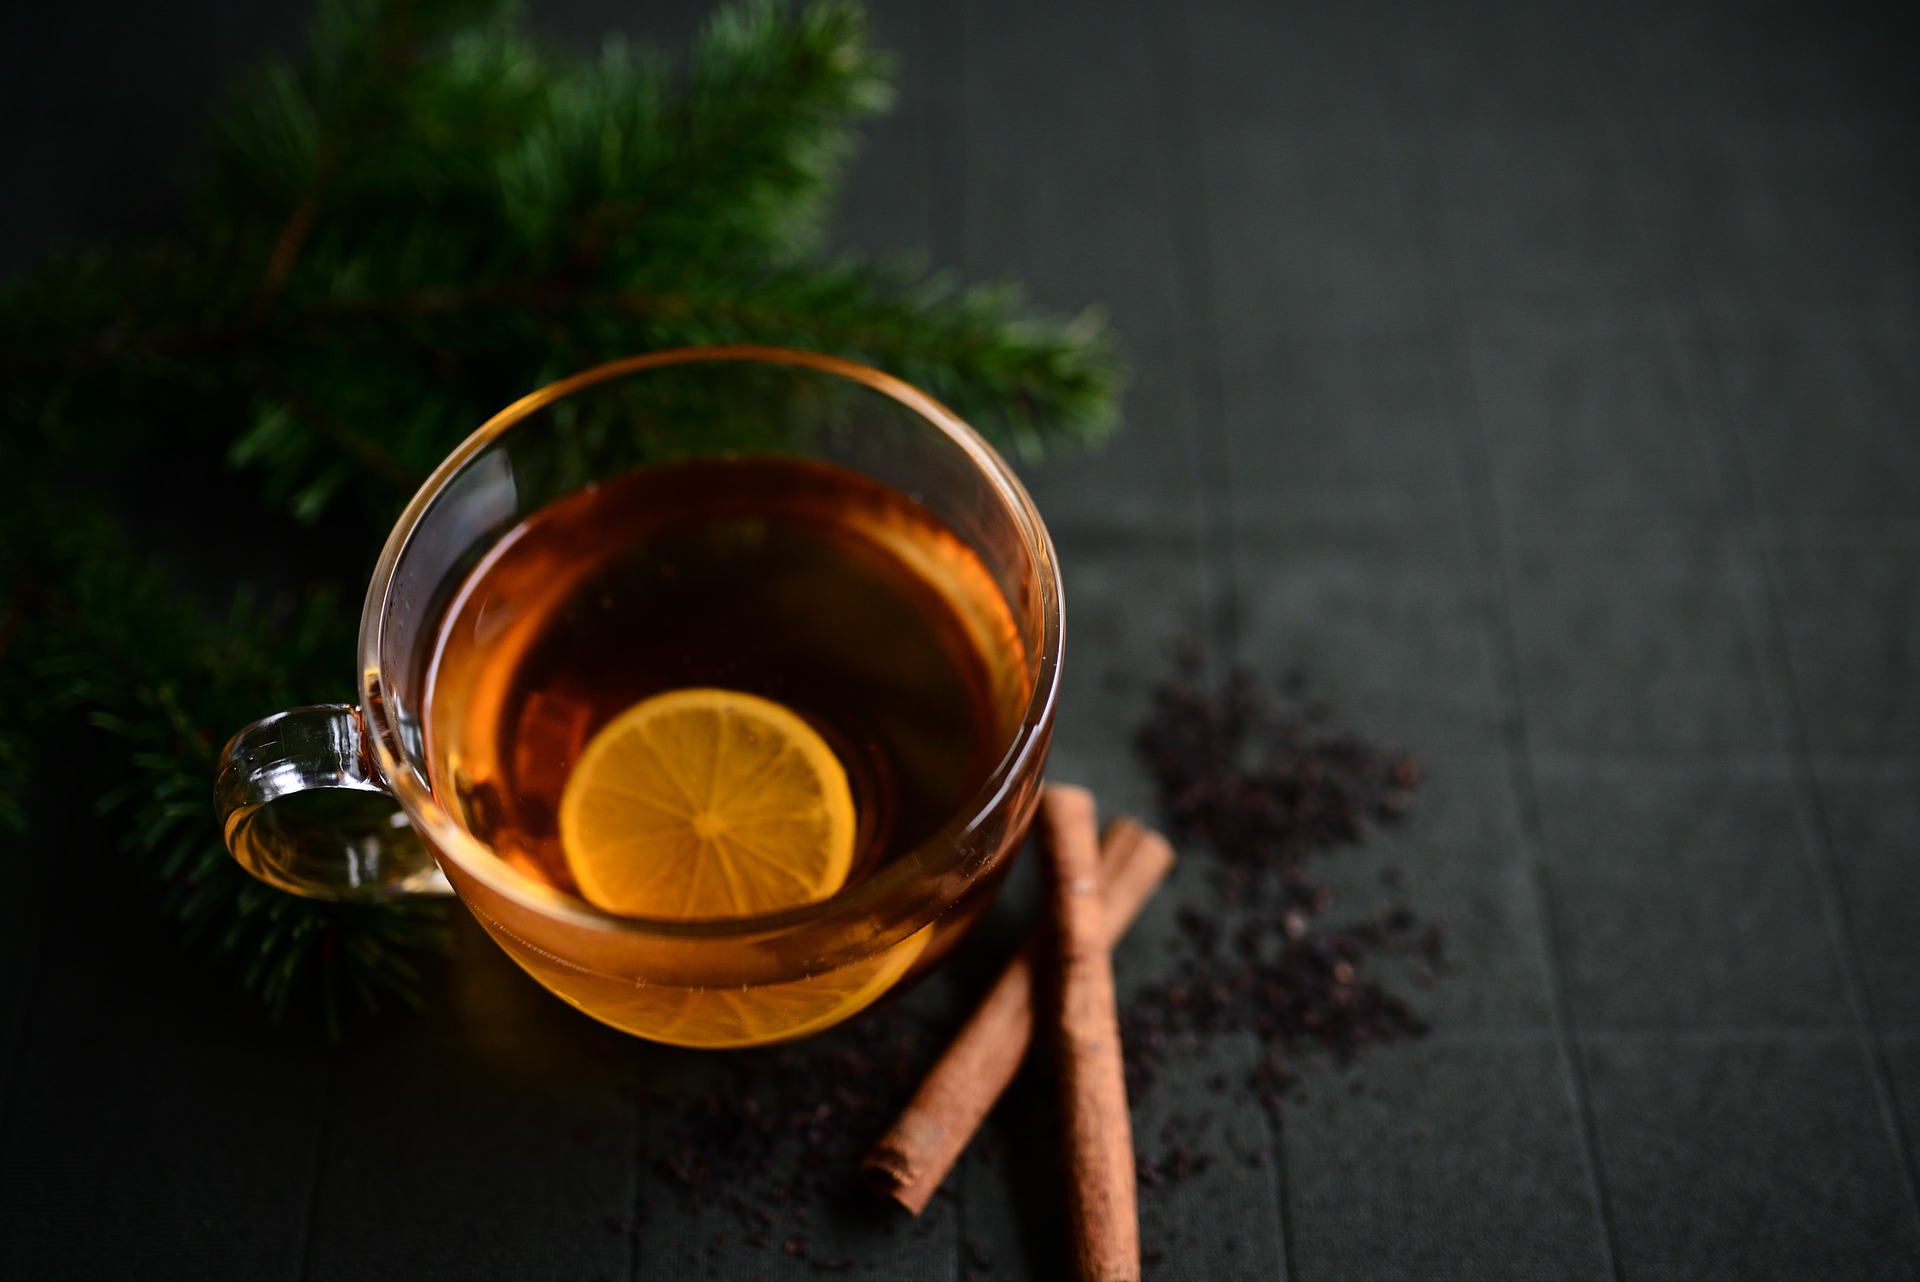 How to Make a Weed Hot Toddy